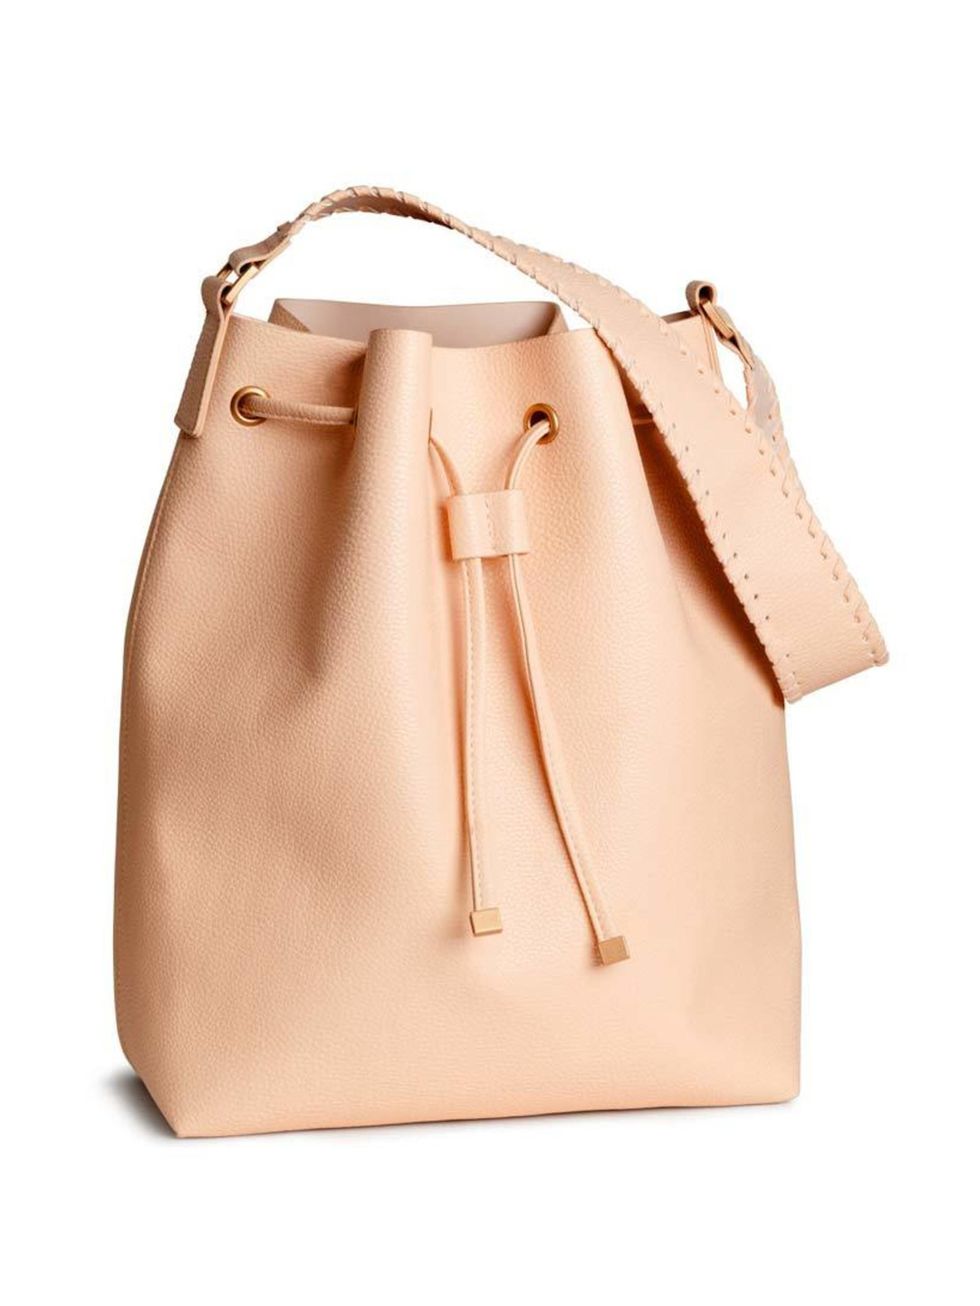 <p>This season's it-bag is the bucket, and the high street has some of the best around. </p>

<p><a href="http://www.hm.com/gb/product/88461?article=88461-A" target="_blank">H&M</a> bag, £19.99</p>